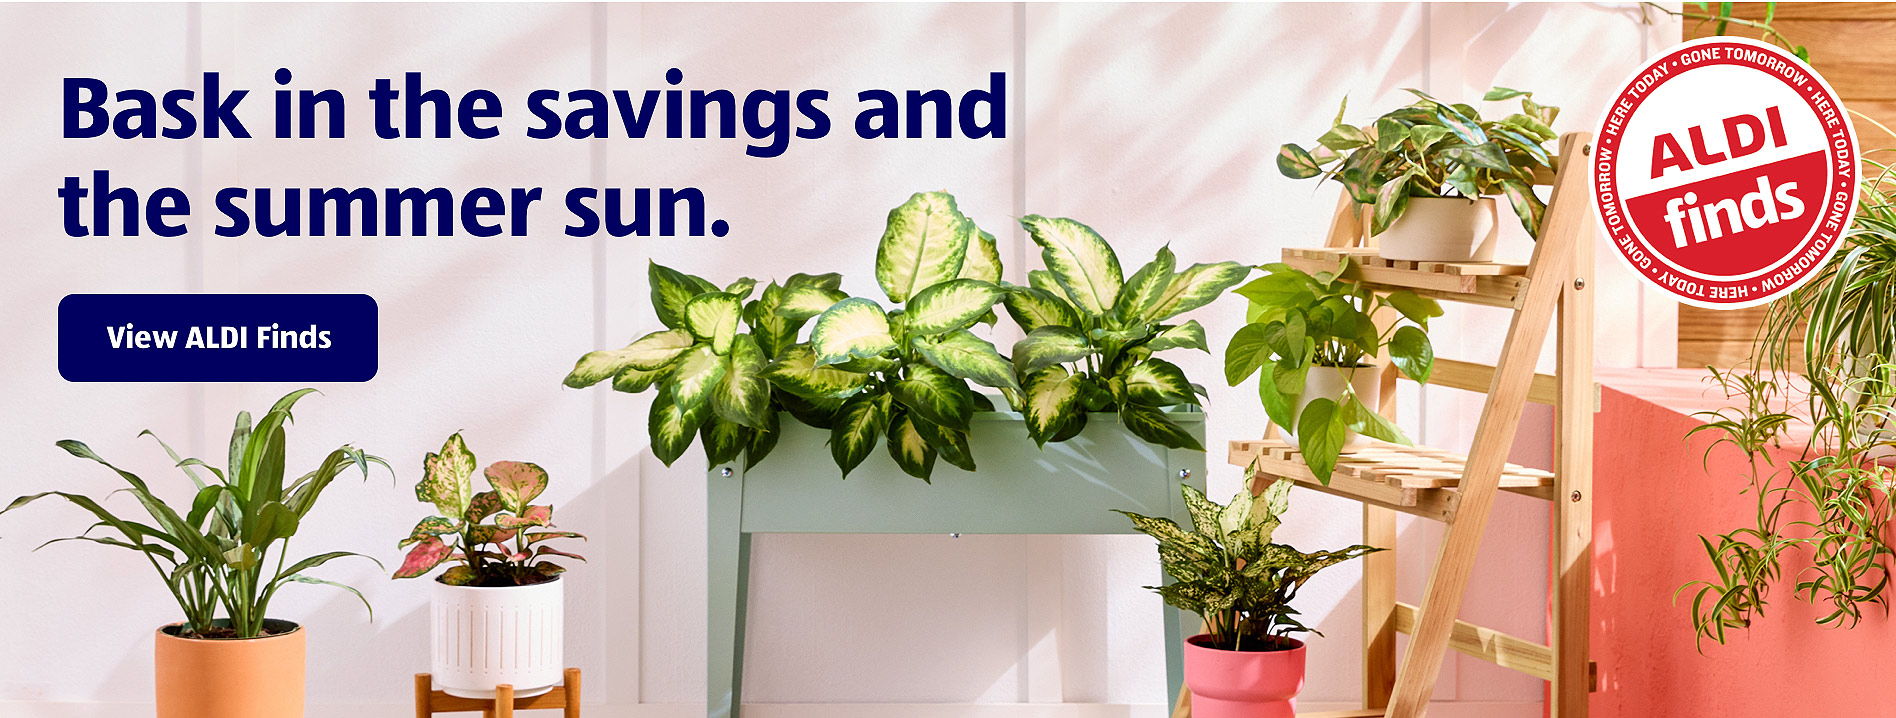 Bask in the savings and the summer sun. View ALDI Finds.